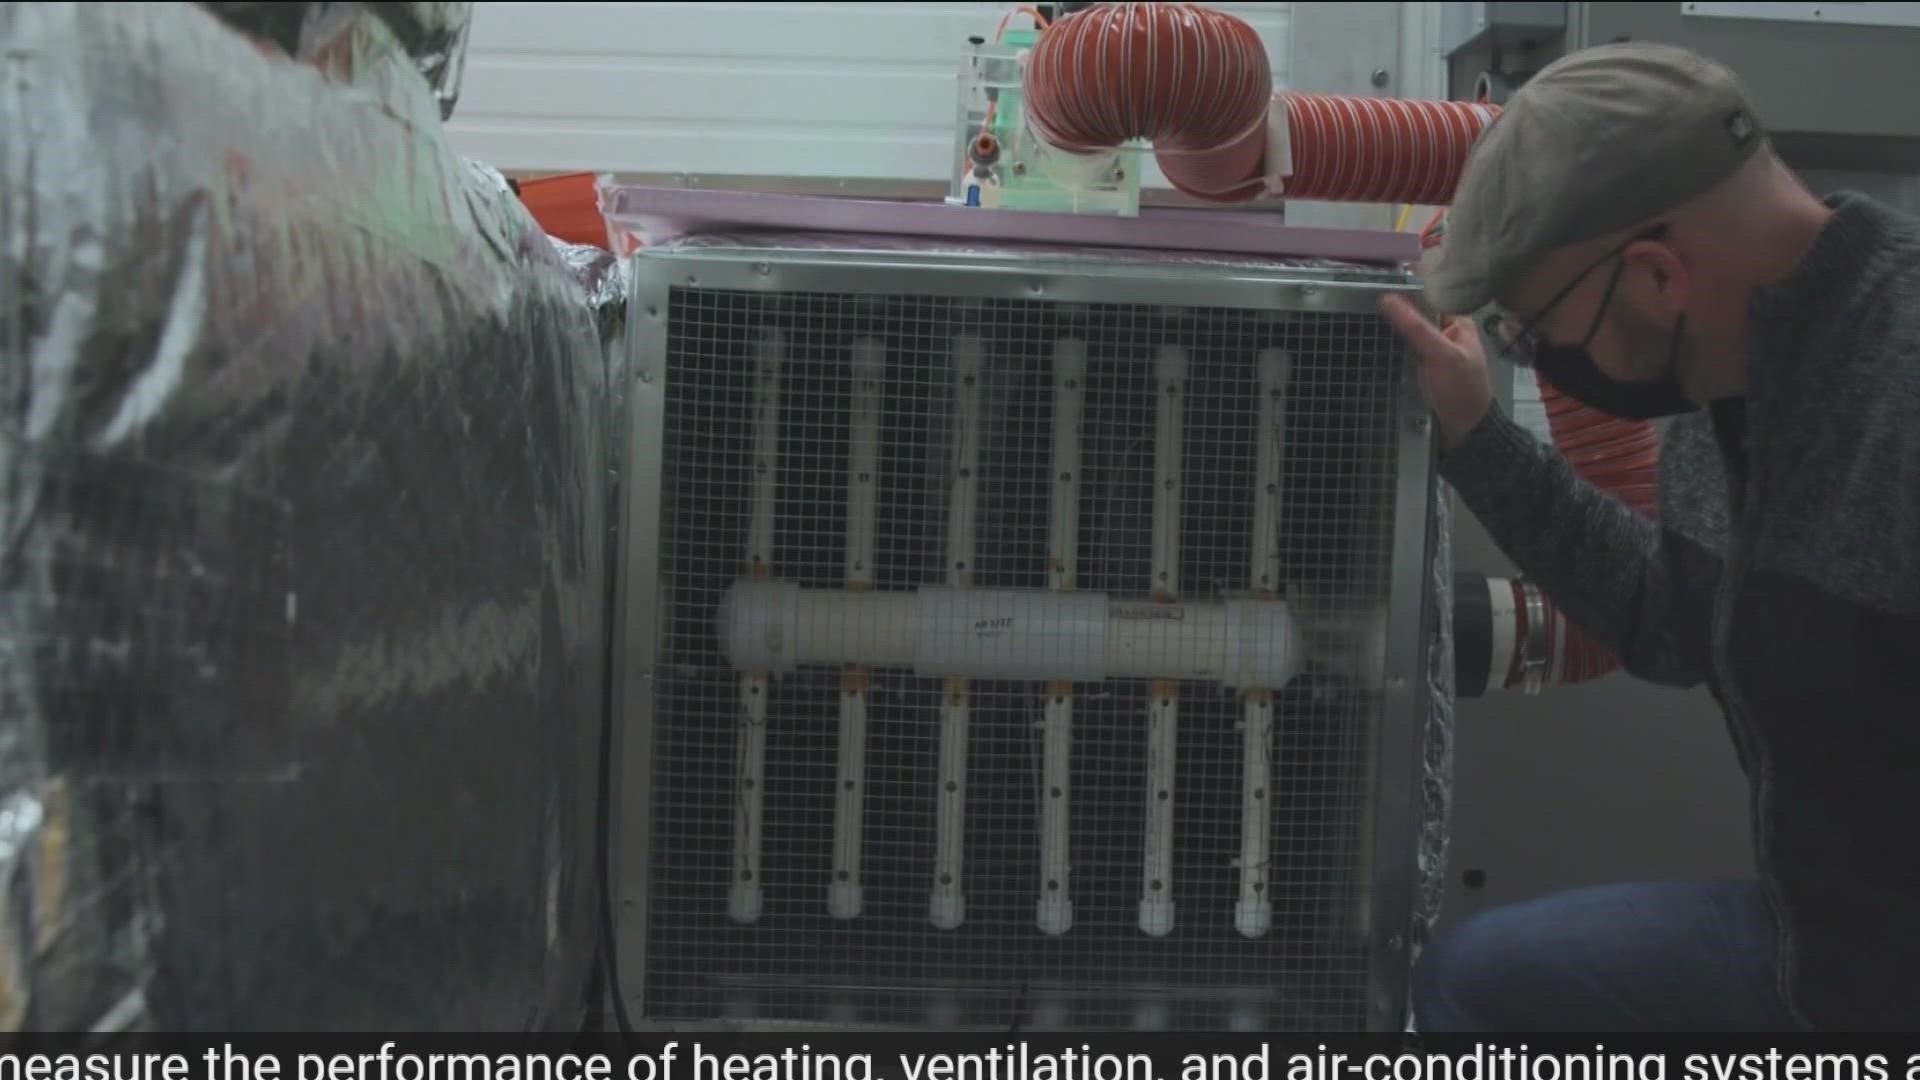 Dr. Rodah Motkuri and his team in Richland have perfected a technology that could eliminate the need for a compressor in central air conditioning, using SORBENT.